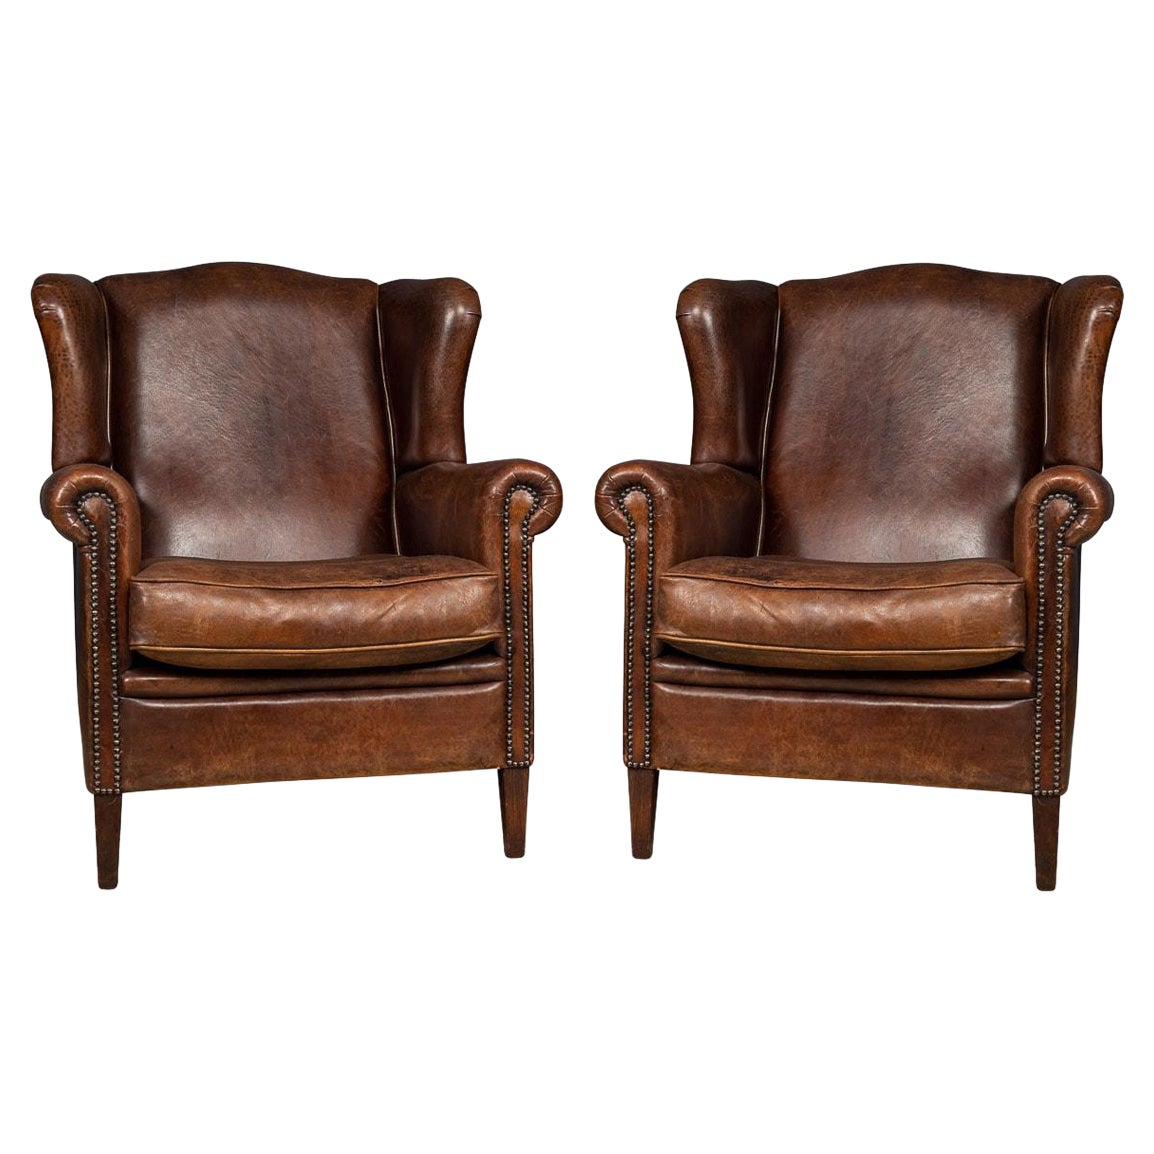 20th Century Dutch Sheepskin Leather Wing-Back Armchairs